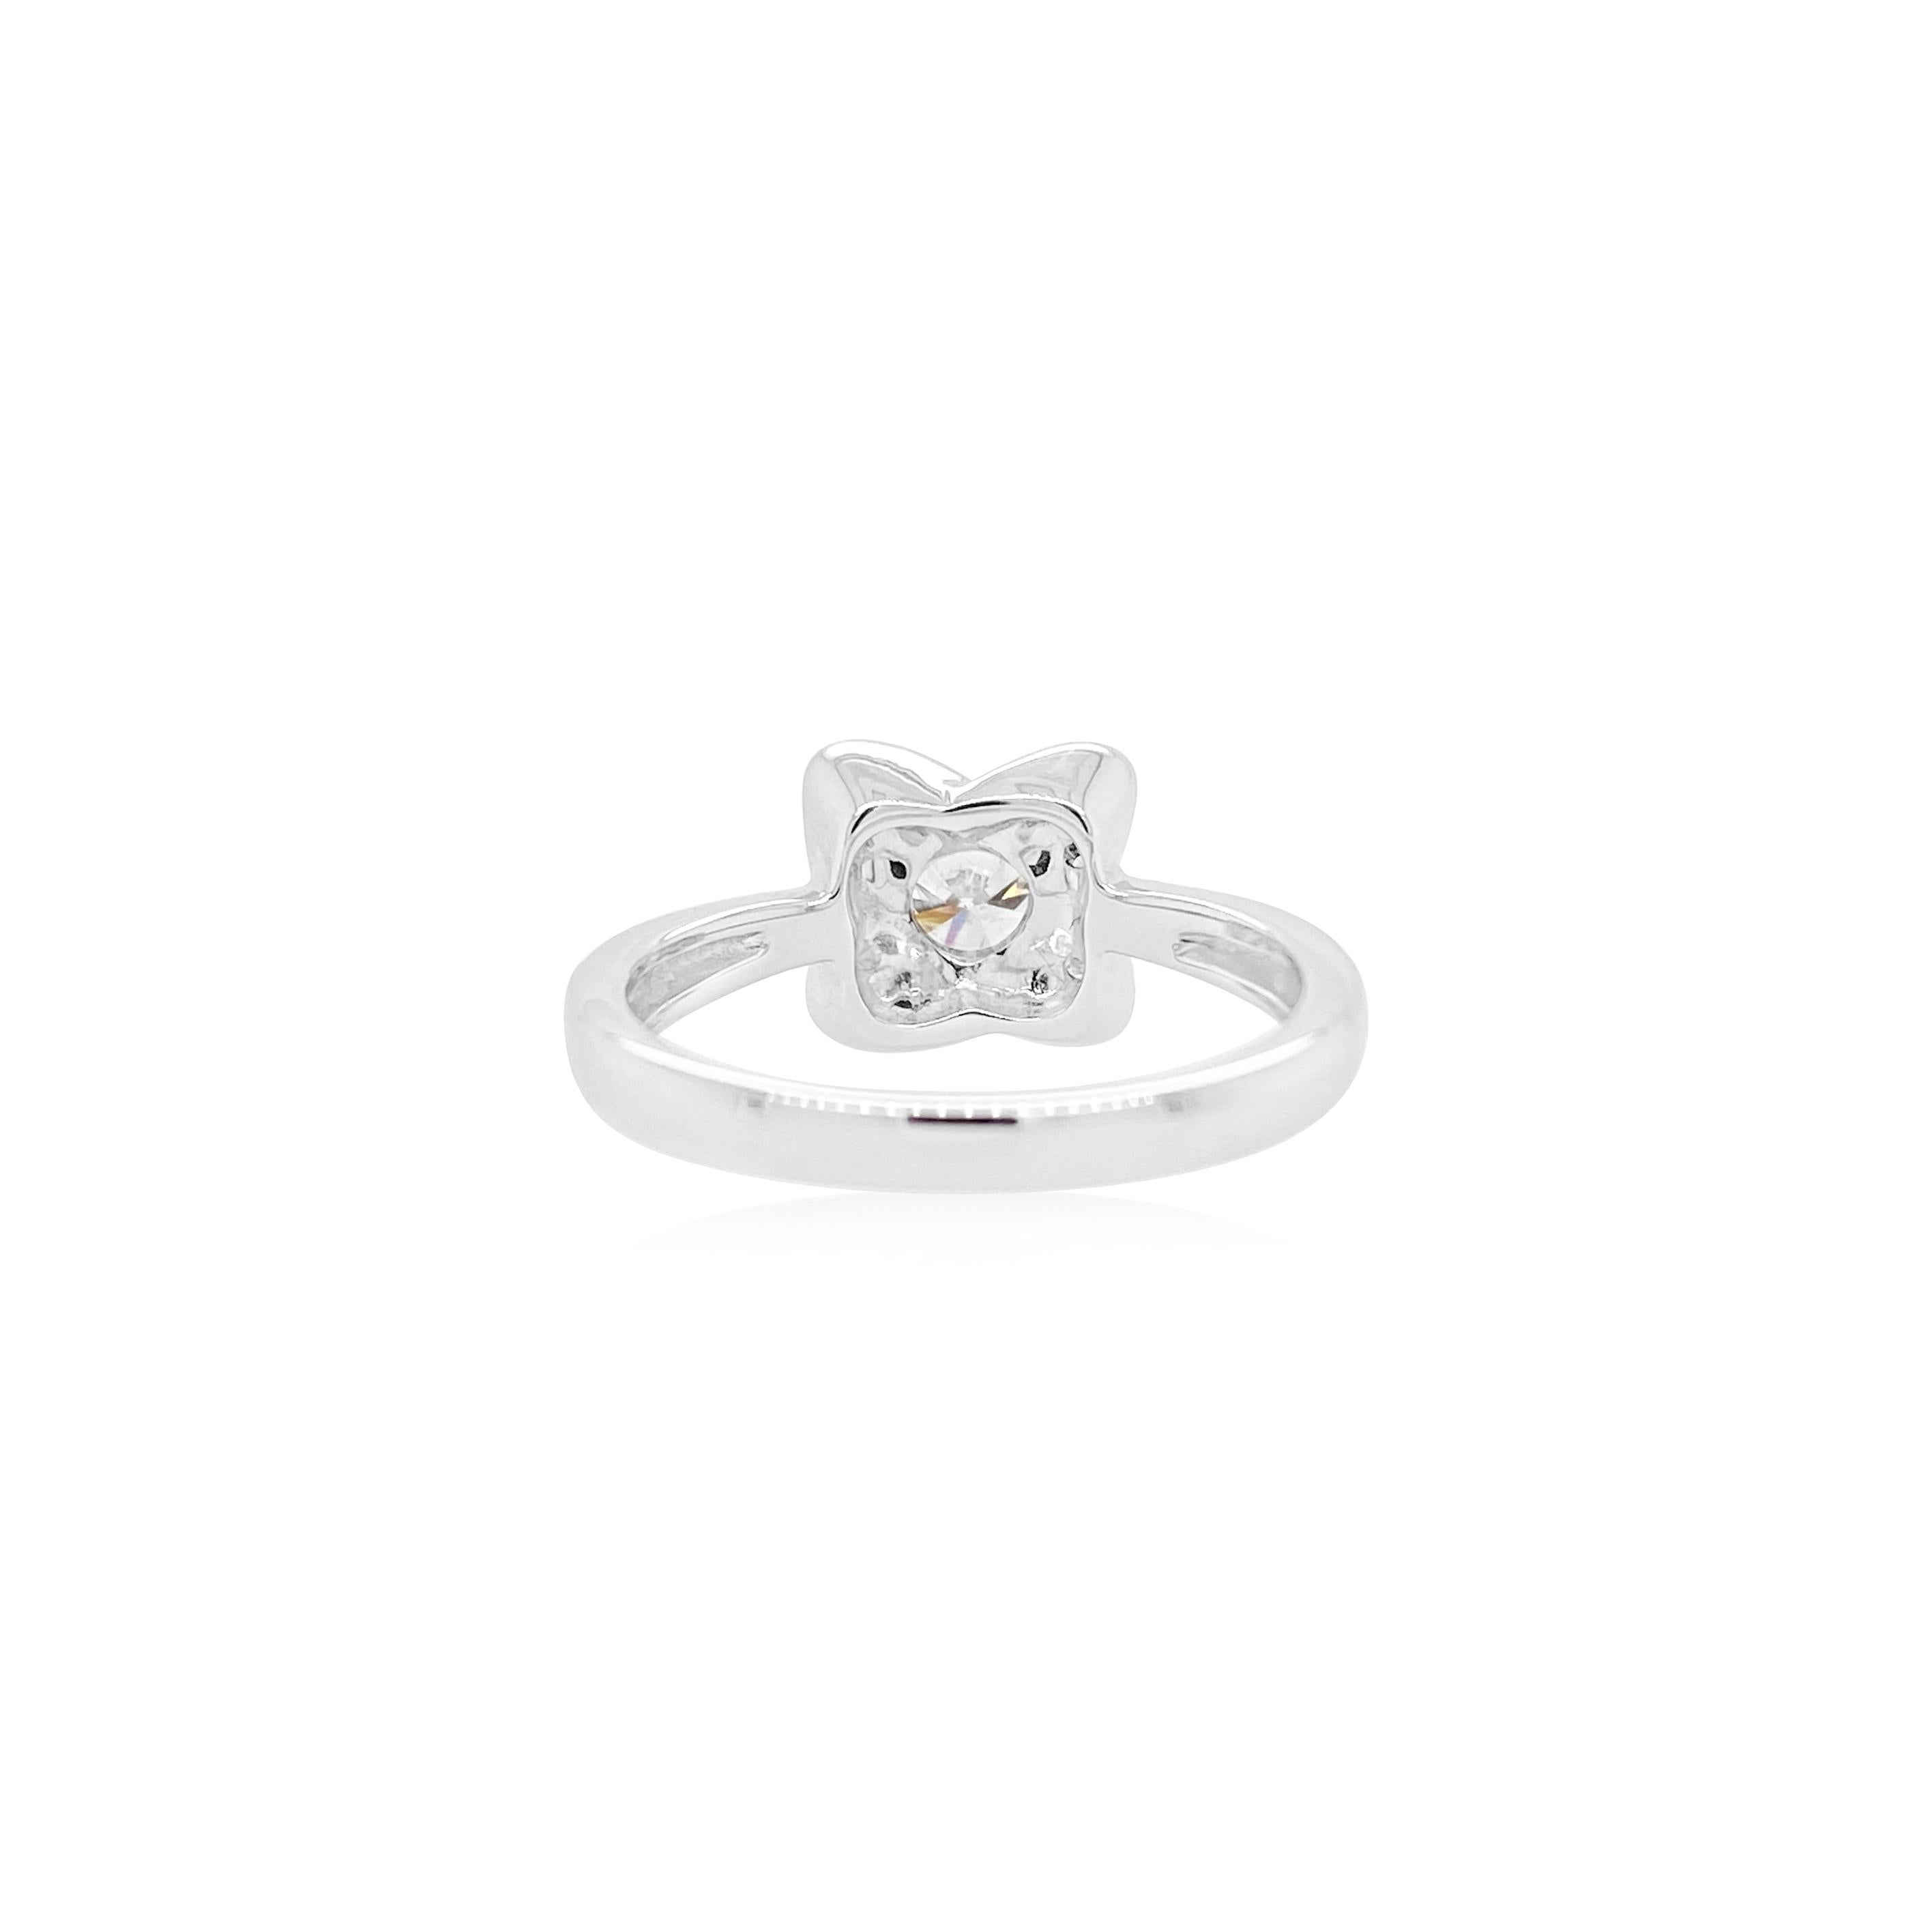 This white diamond ring has a beautiful modern sleek design with a center Solitaire diamond and round white diamonds, perfect for a fancy everyday look.

- Center Diamond- 0.342 CT/ Color G/ SI2 (DGL JAPAN-1226116A)
- White Diamonds - 0.40 CT
- Made